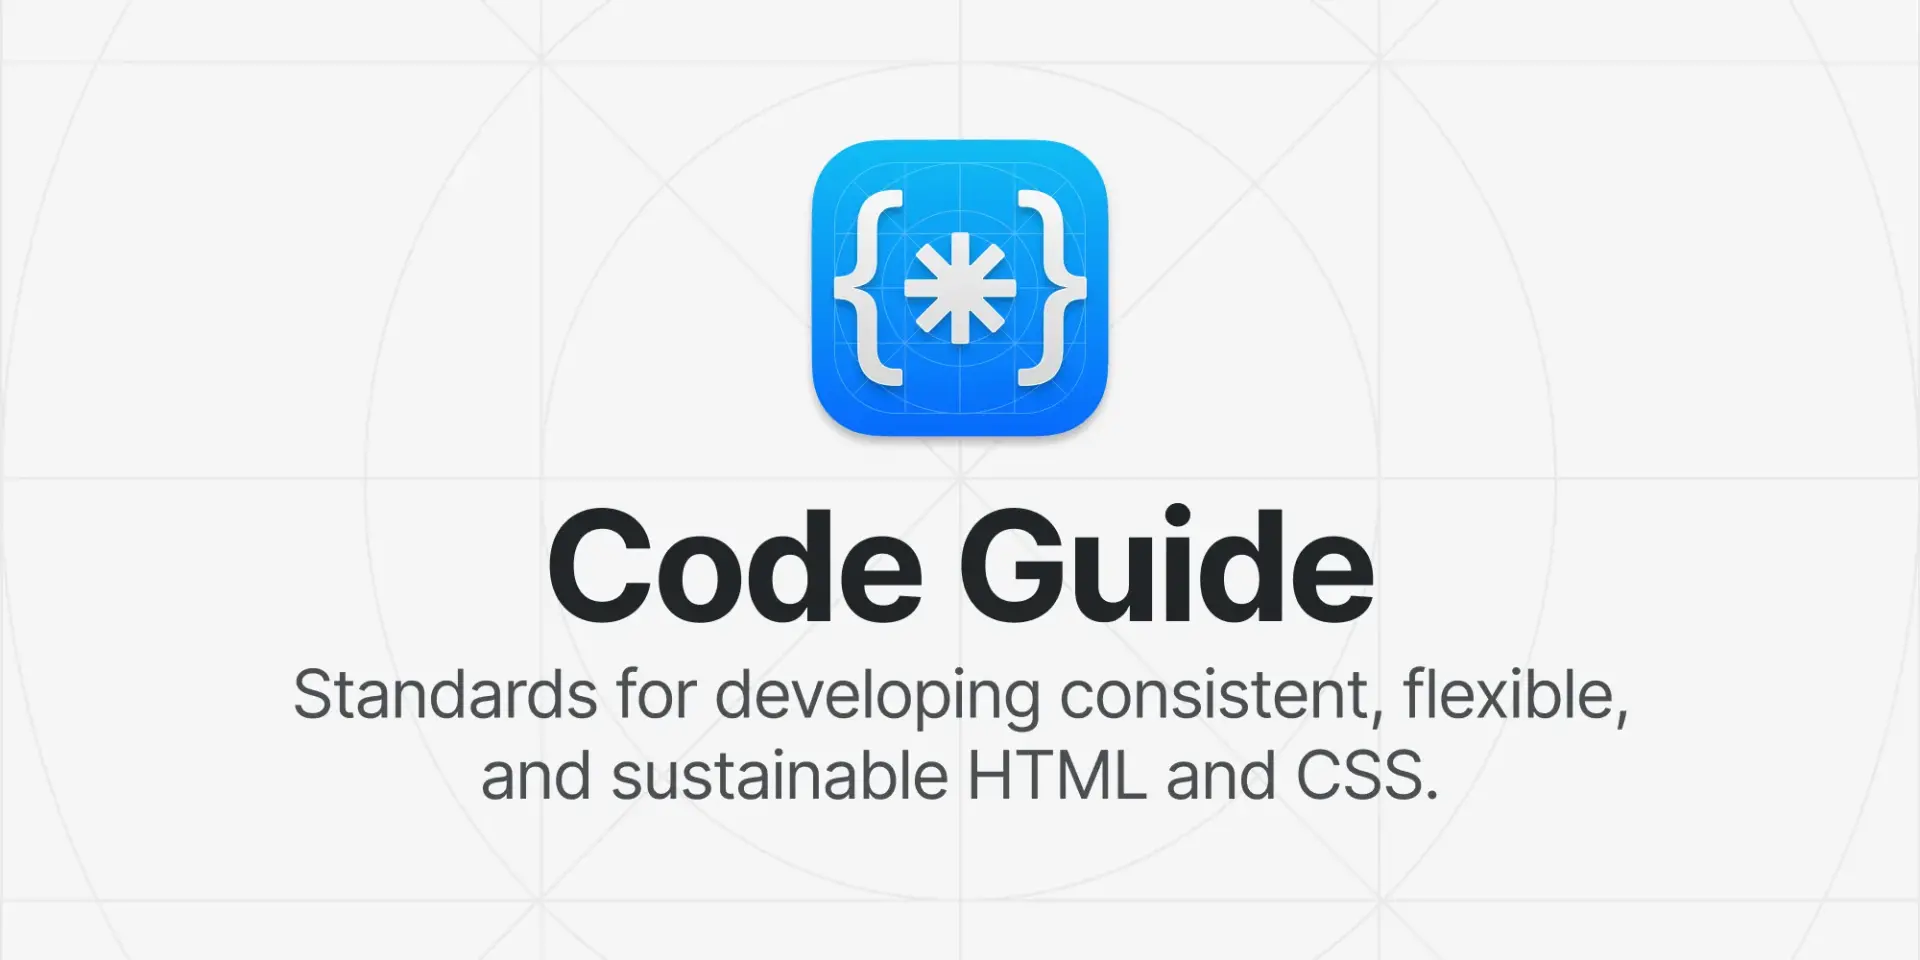 Bdw developpement web code guide html css